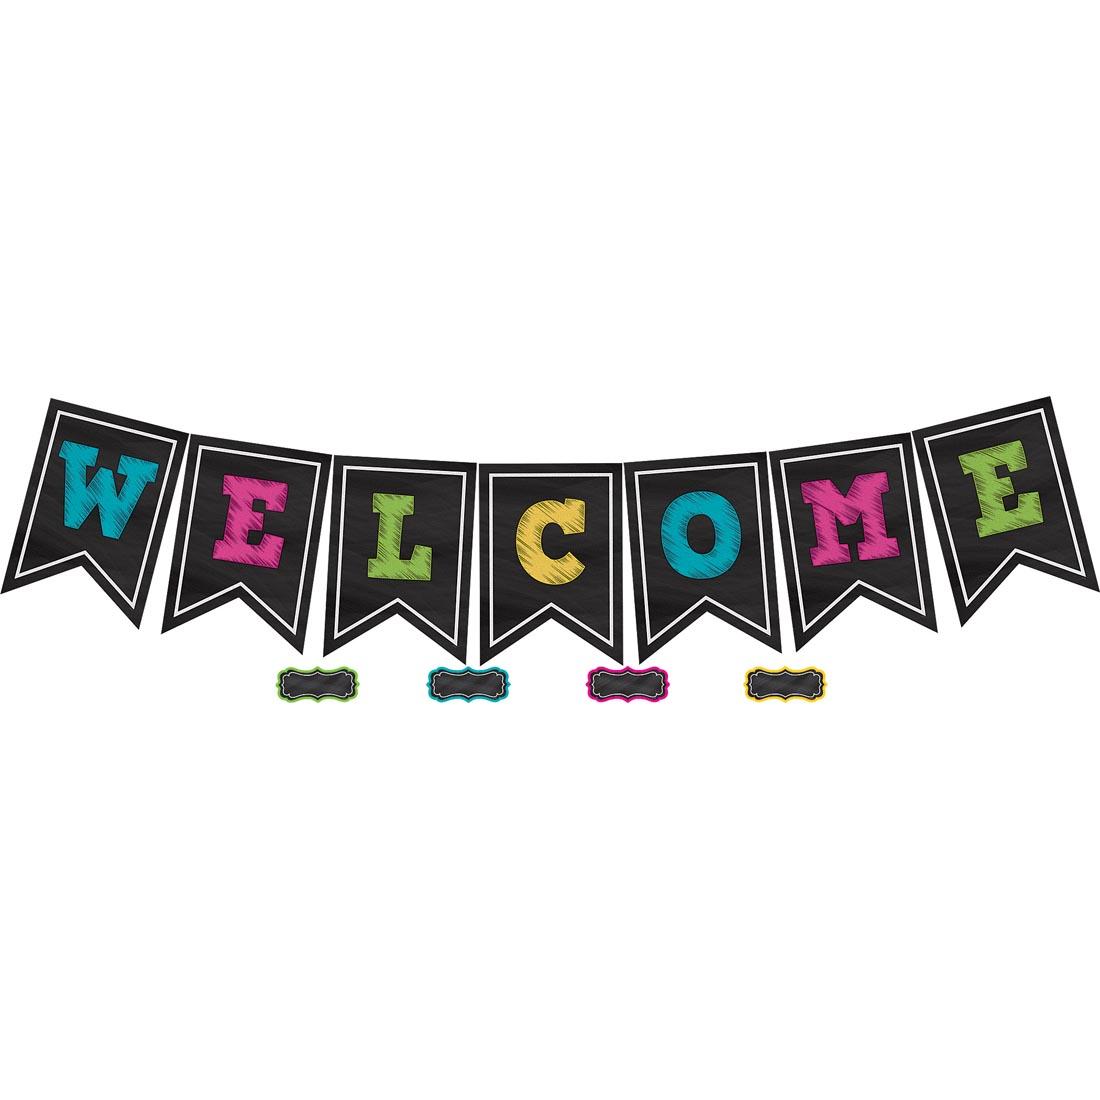 Pennants Welcome Bulletin Board Set from the Chalkboard Brights collection by Teacher Created Resources